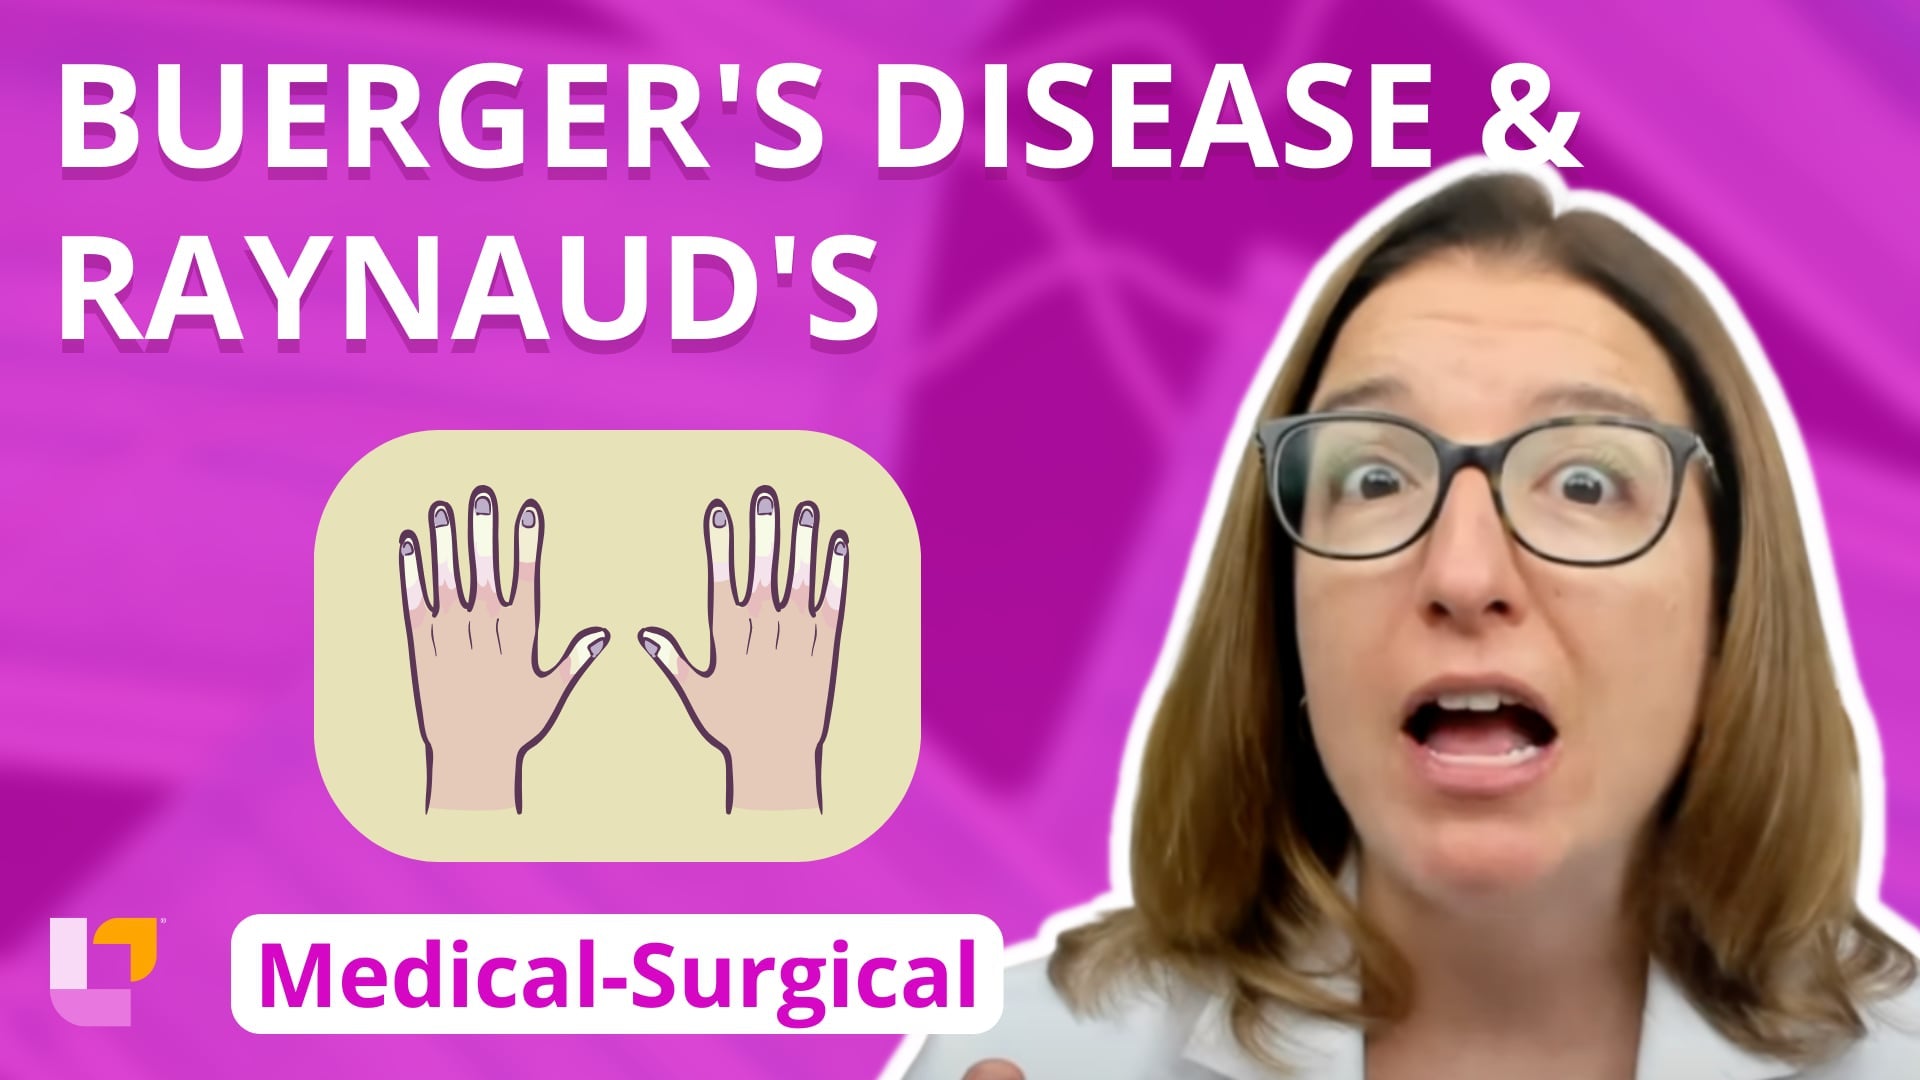 Med-Surg - Cardiovascular System, part 14: Buerger's Disease and Raynaud's - LevelUpRN